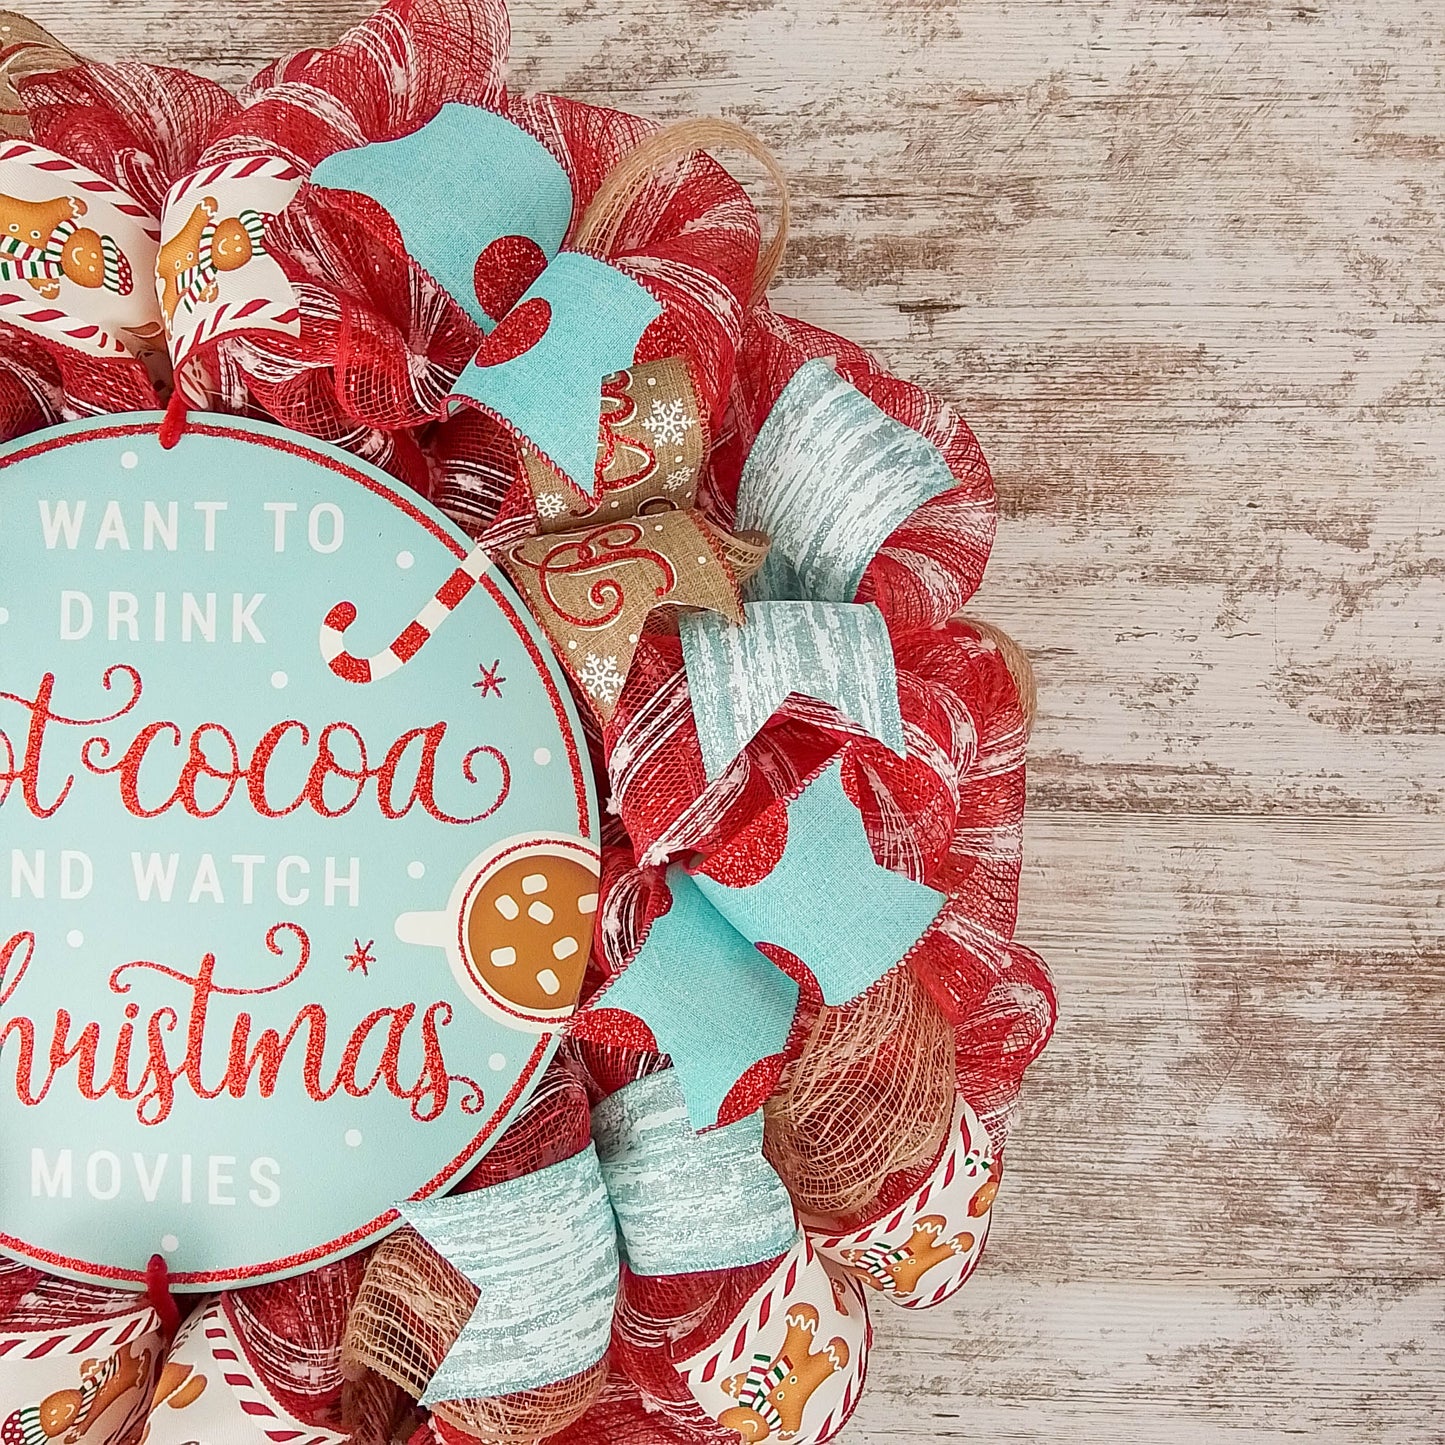 Christmas Cookies Gingerbread Wreath - Outdoor Holiday Wreath - Mesh Front Door Wreath - Turquoise Red Brown White Green